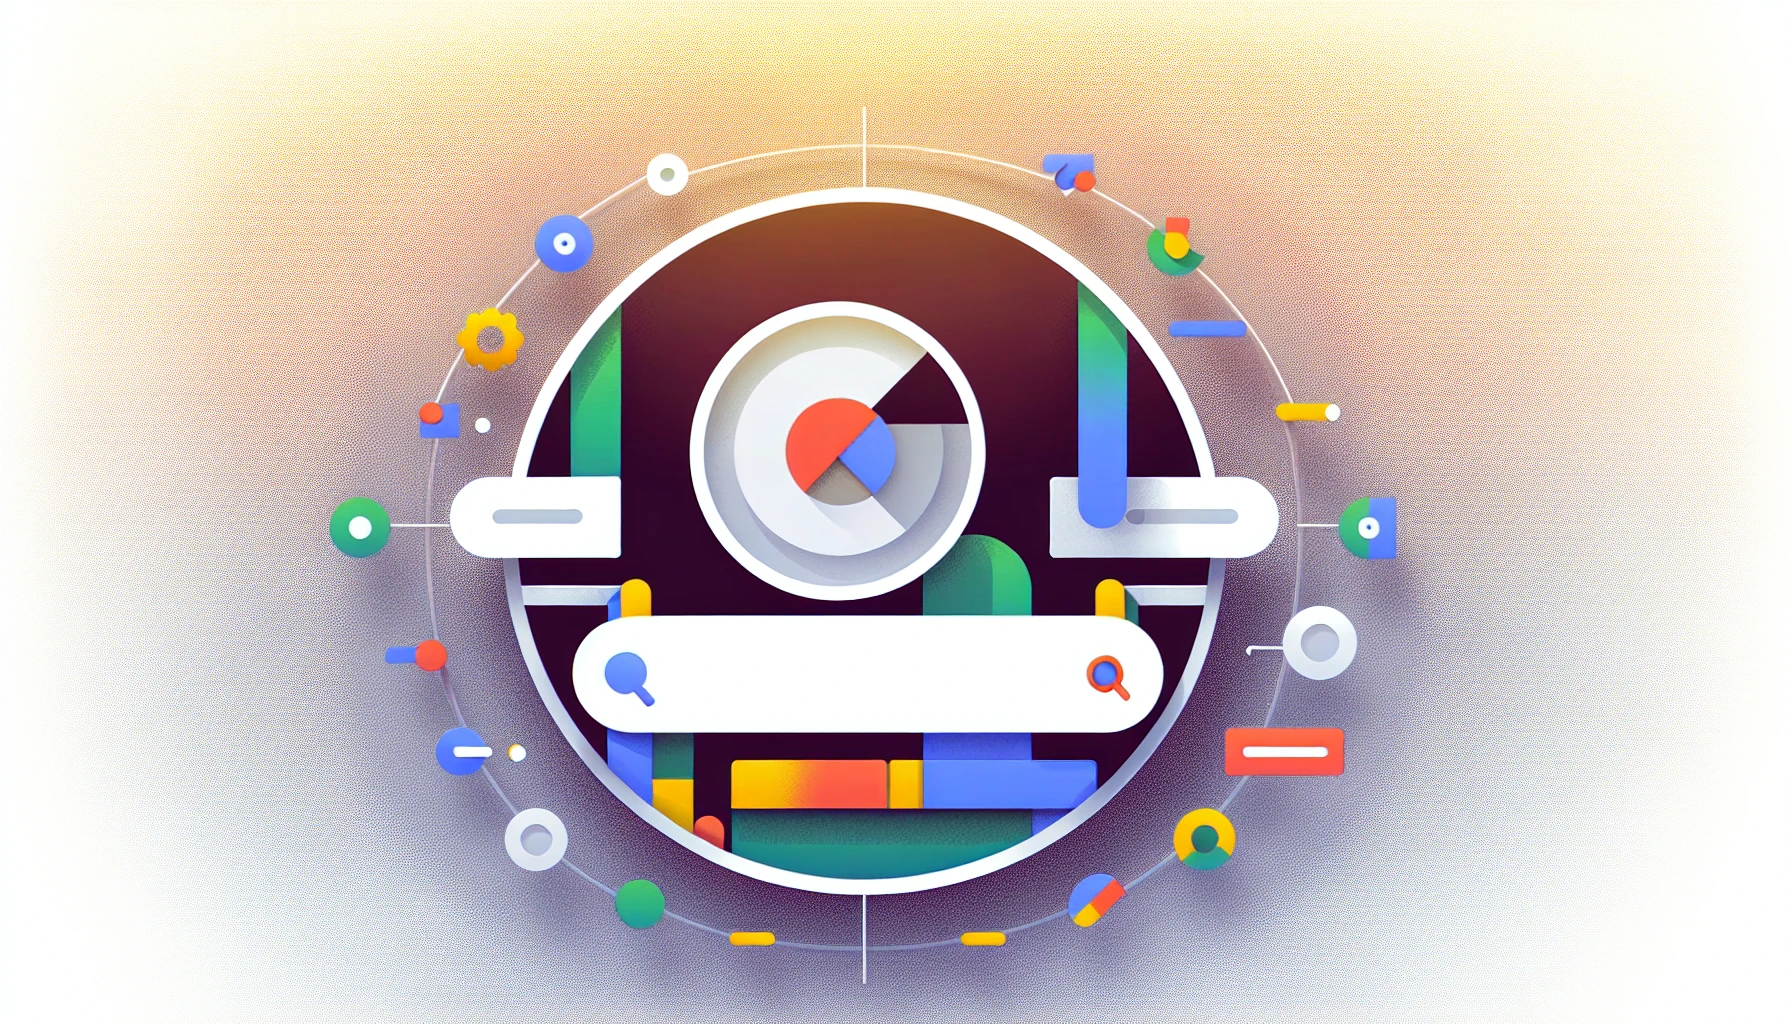 Illustration of a website with Google logo and search bar